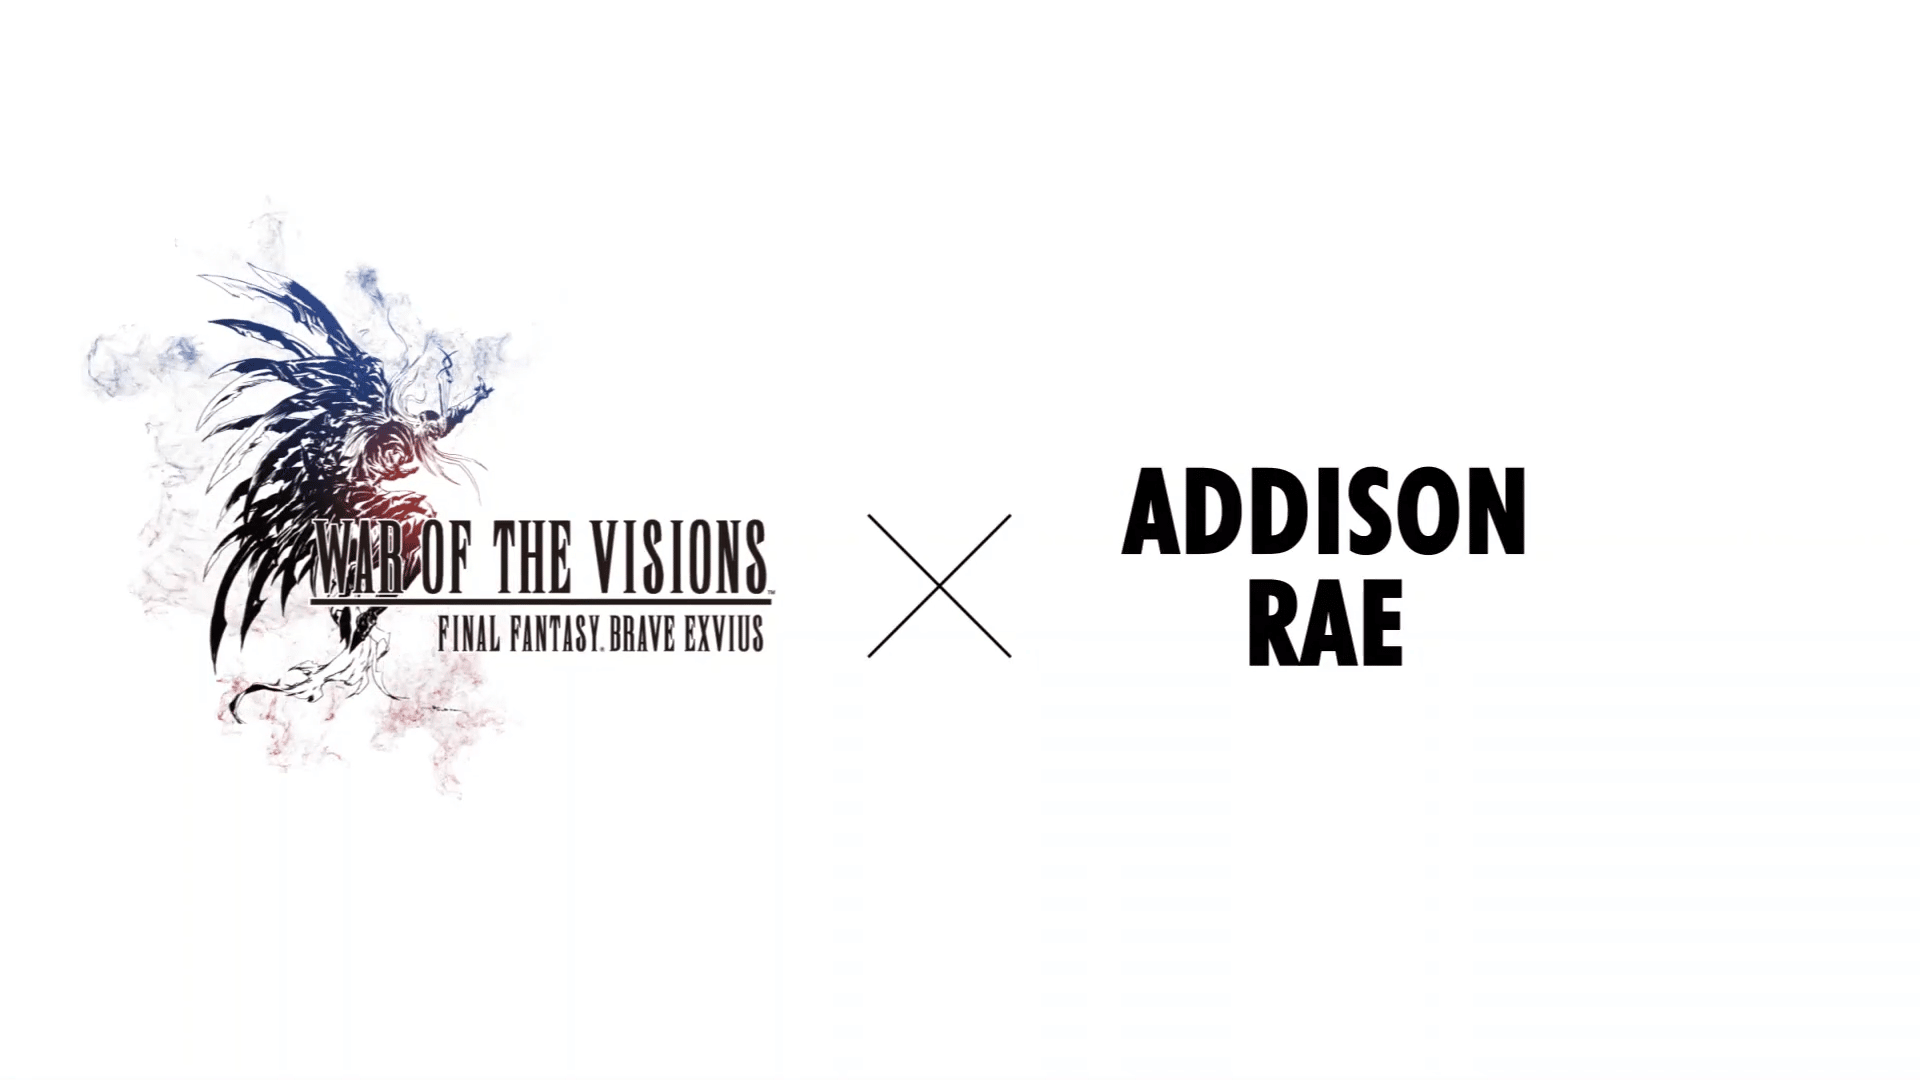 War of the Visions Final Fantasy Brave Exvius Collabs with “TikTok Sensation” Addison Rae; New Free Vision Card